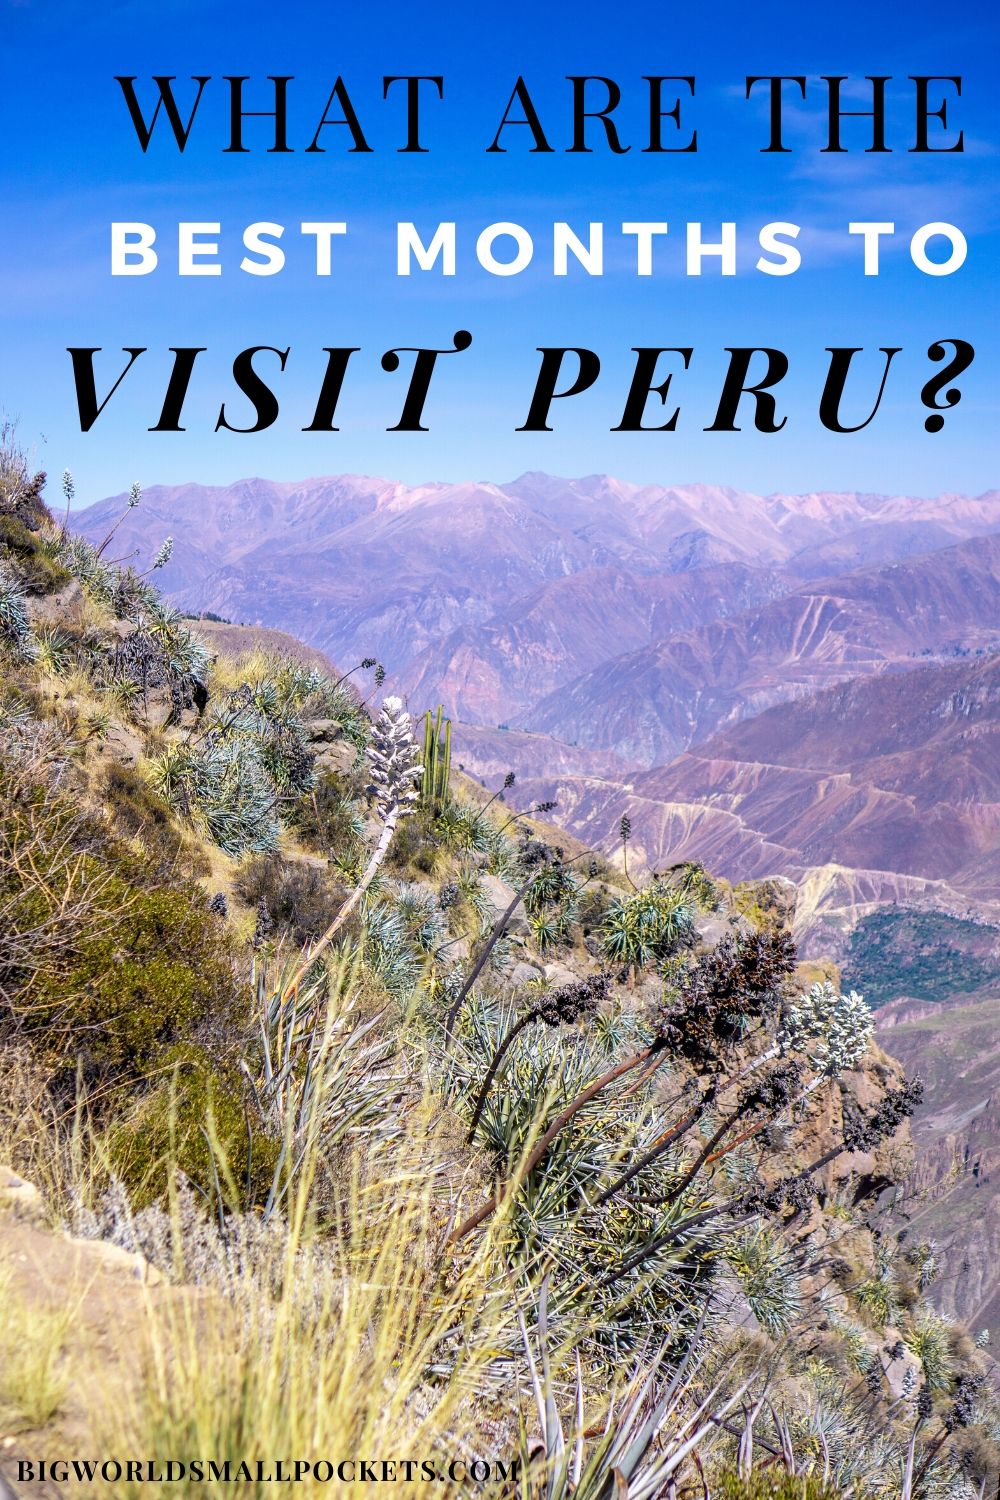 When Is The Best Time to Visit Peru?